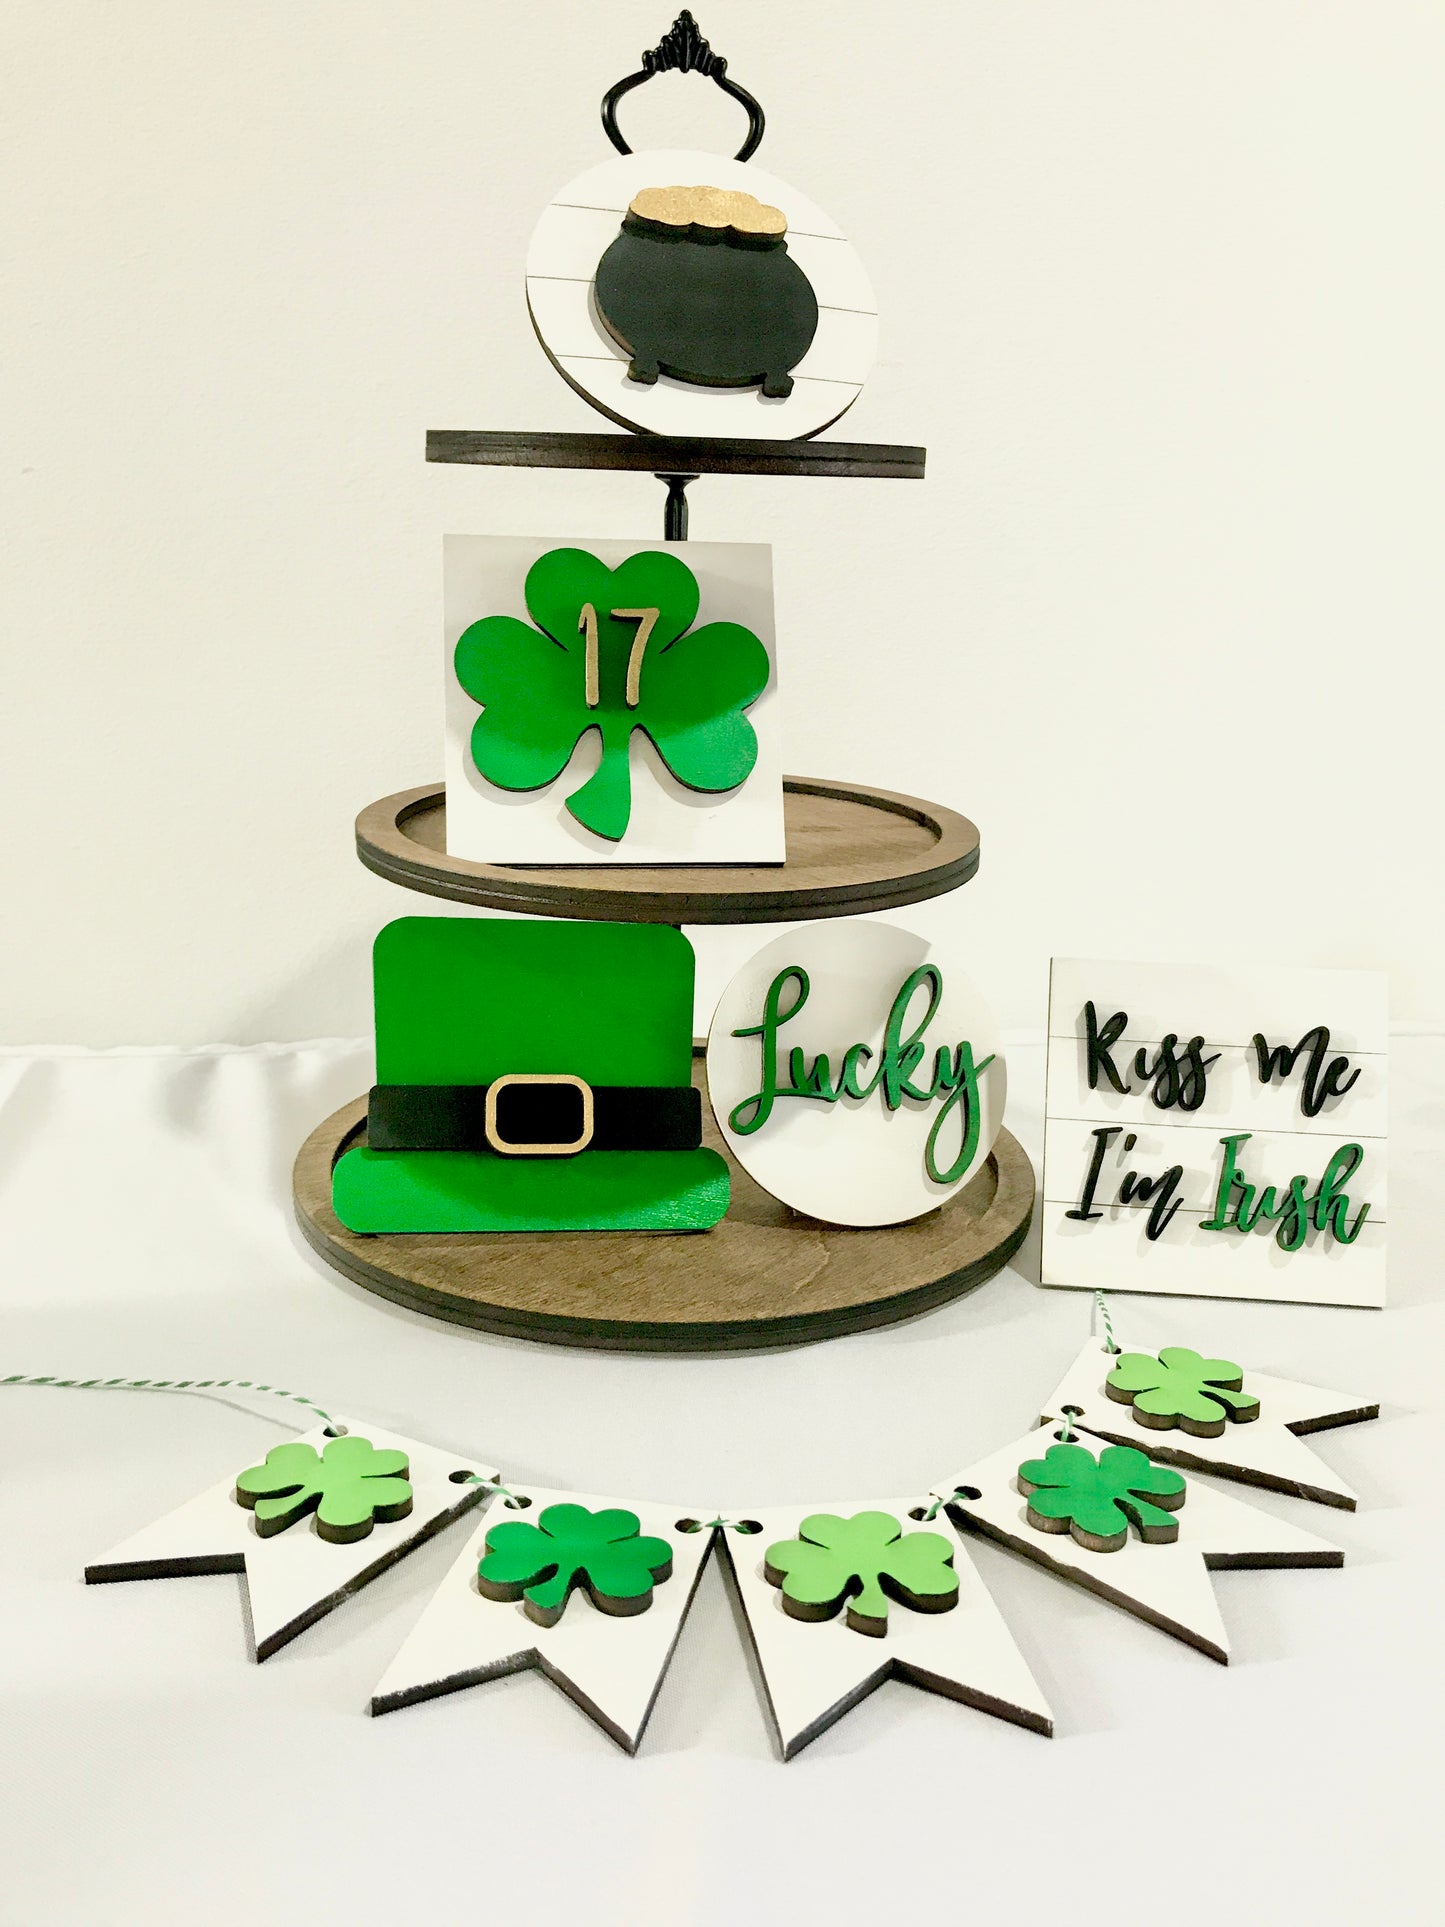 St. Patrick's Day Tiered Tray Mini Signs Bundle